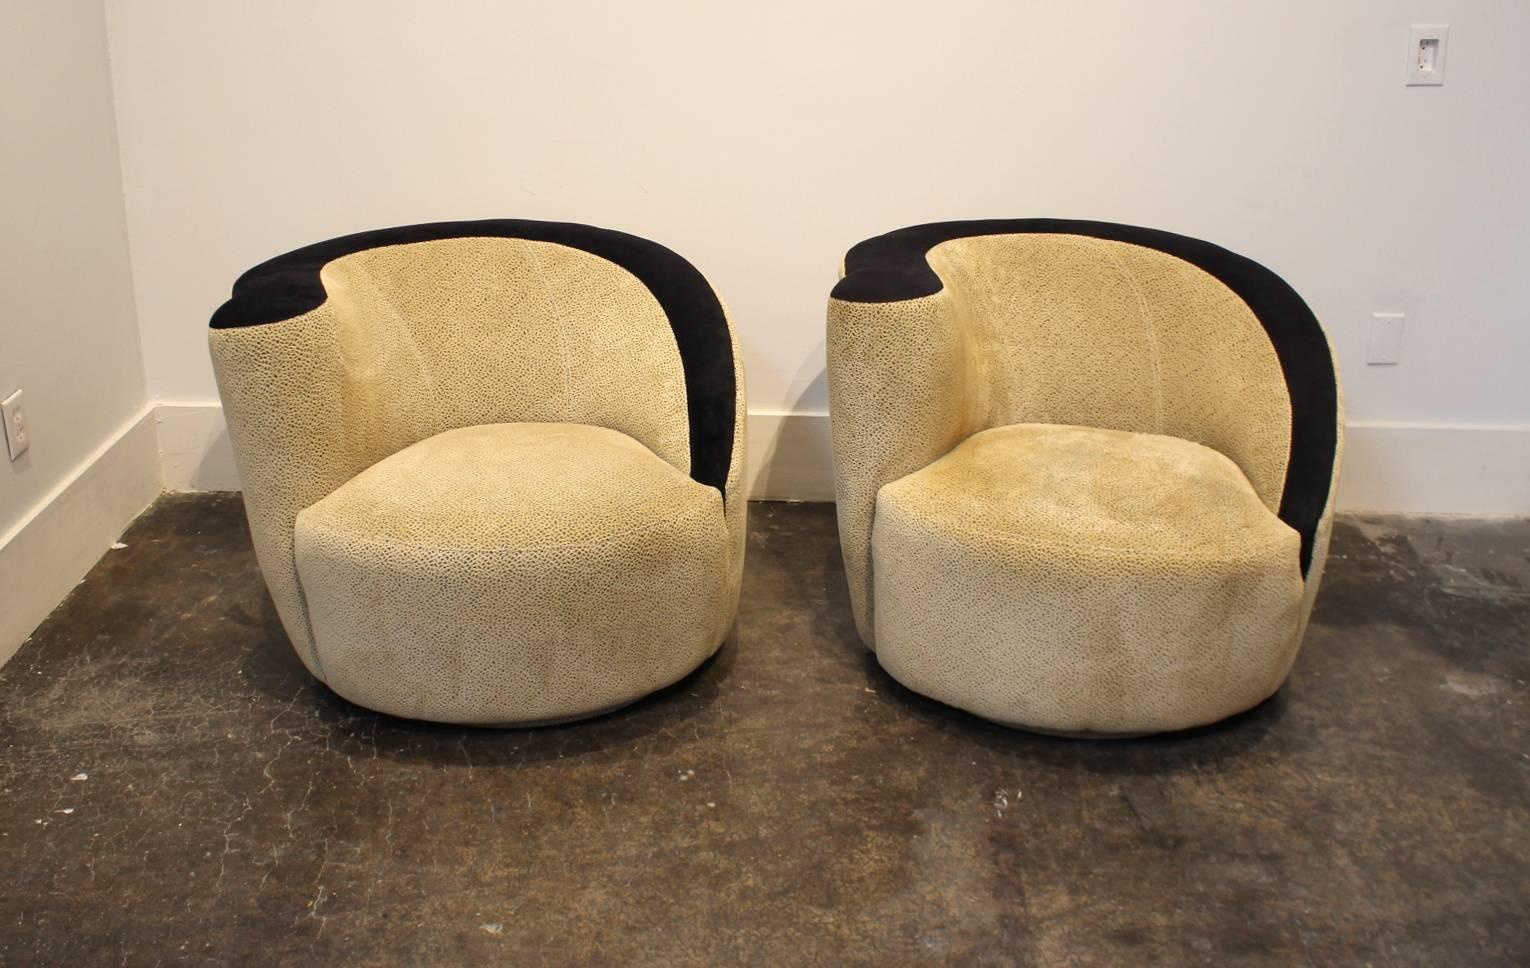 Set of two right-facing Kagan Nautilus swivel chairs. Light cream colored fabric textured with black specks topped by micro-suede like black accent along the top edge and arms. 

Condition: sturdy and clean. Light but large stain on one of the